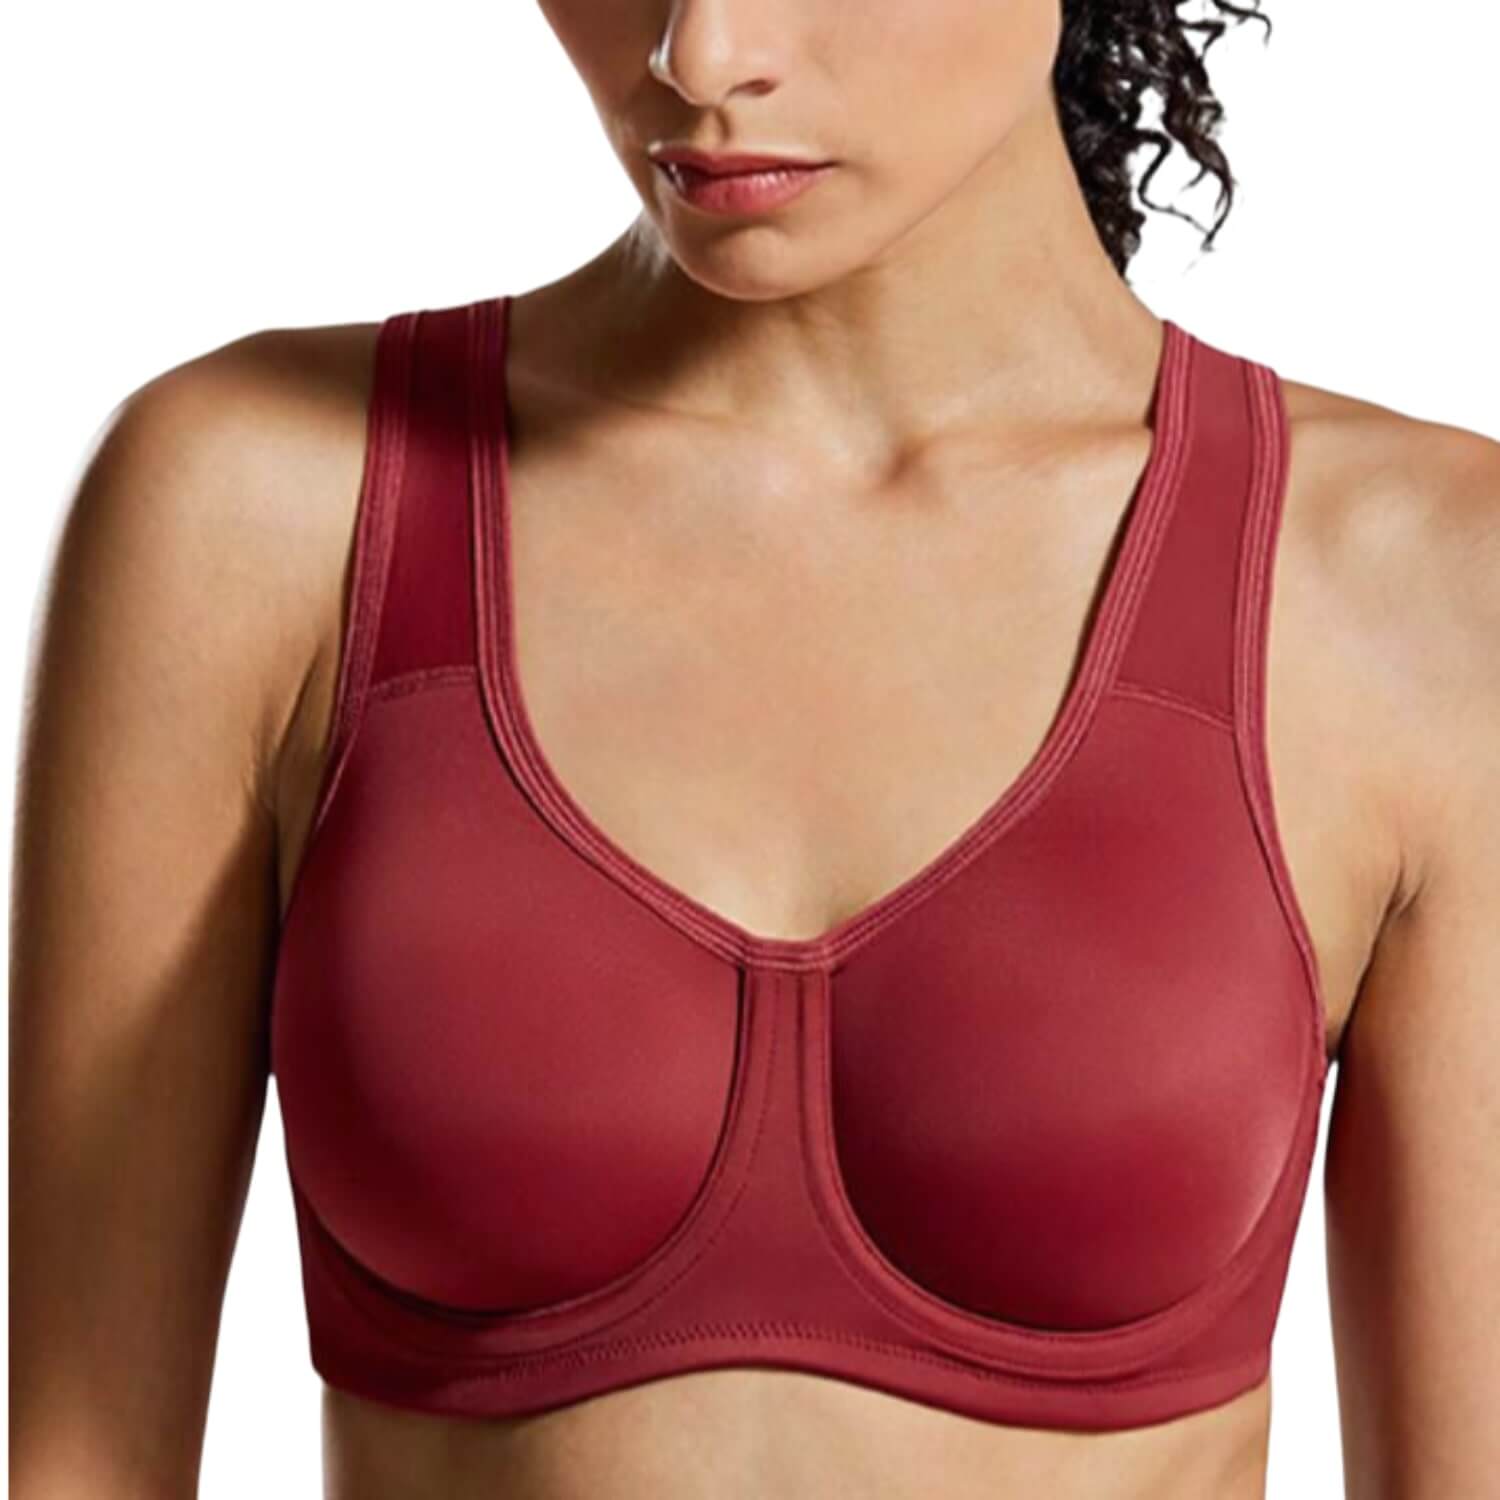 Lace Glue Sport Big Walcol Sport Bras for Women Chinese Top Ultra